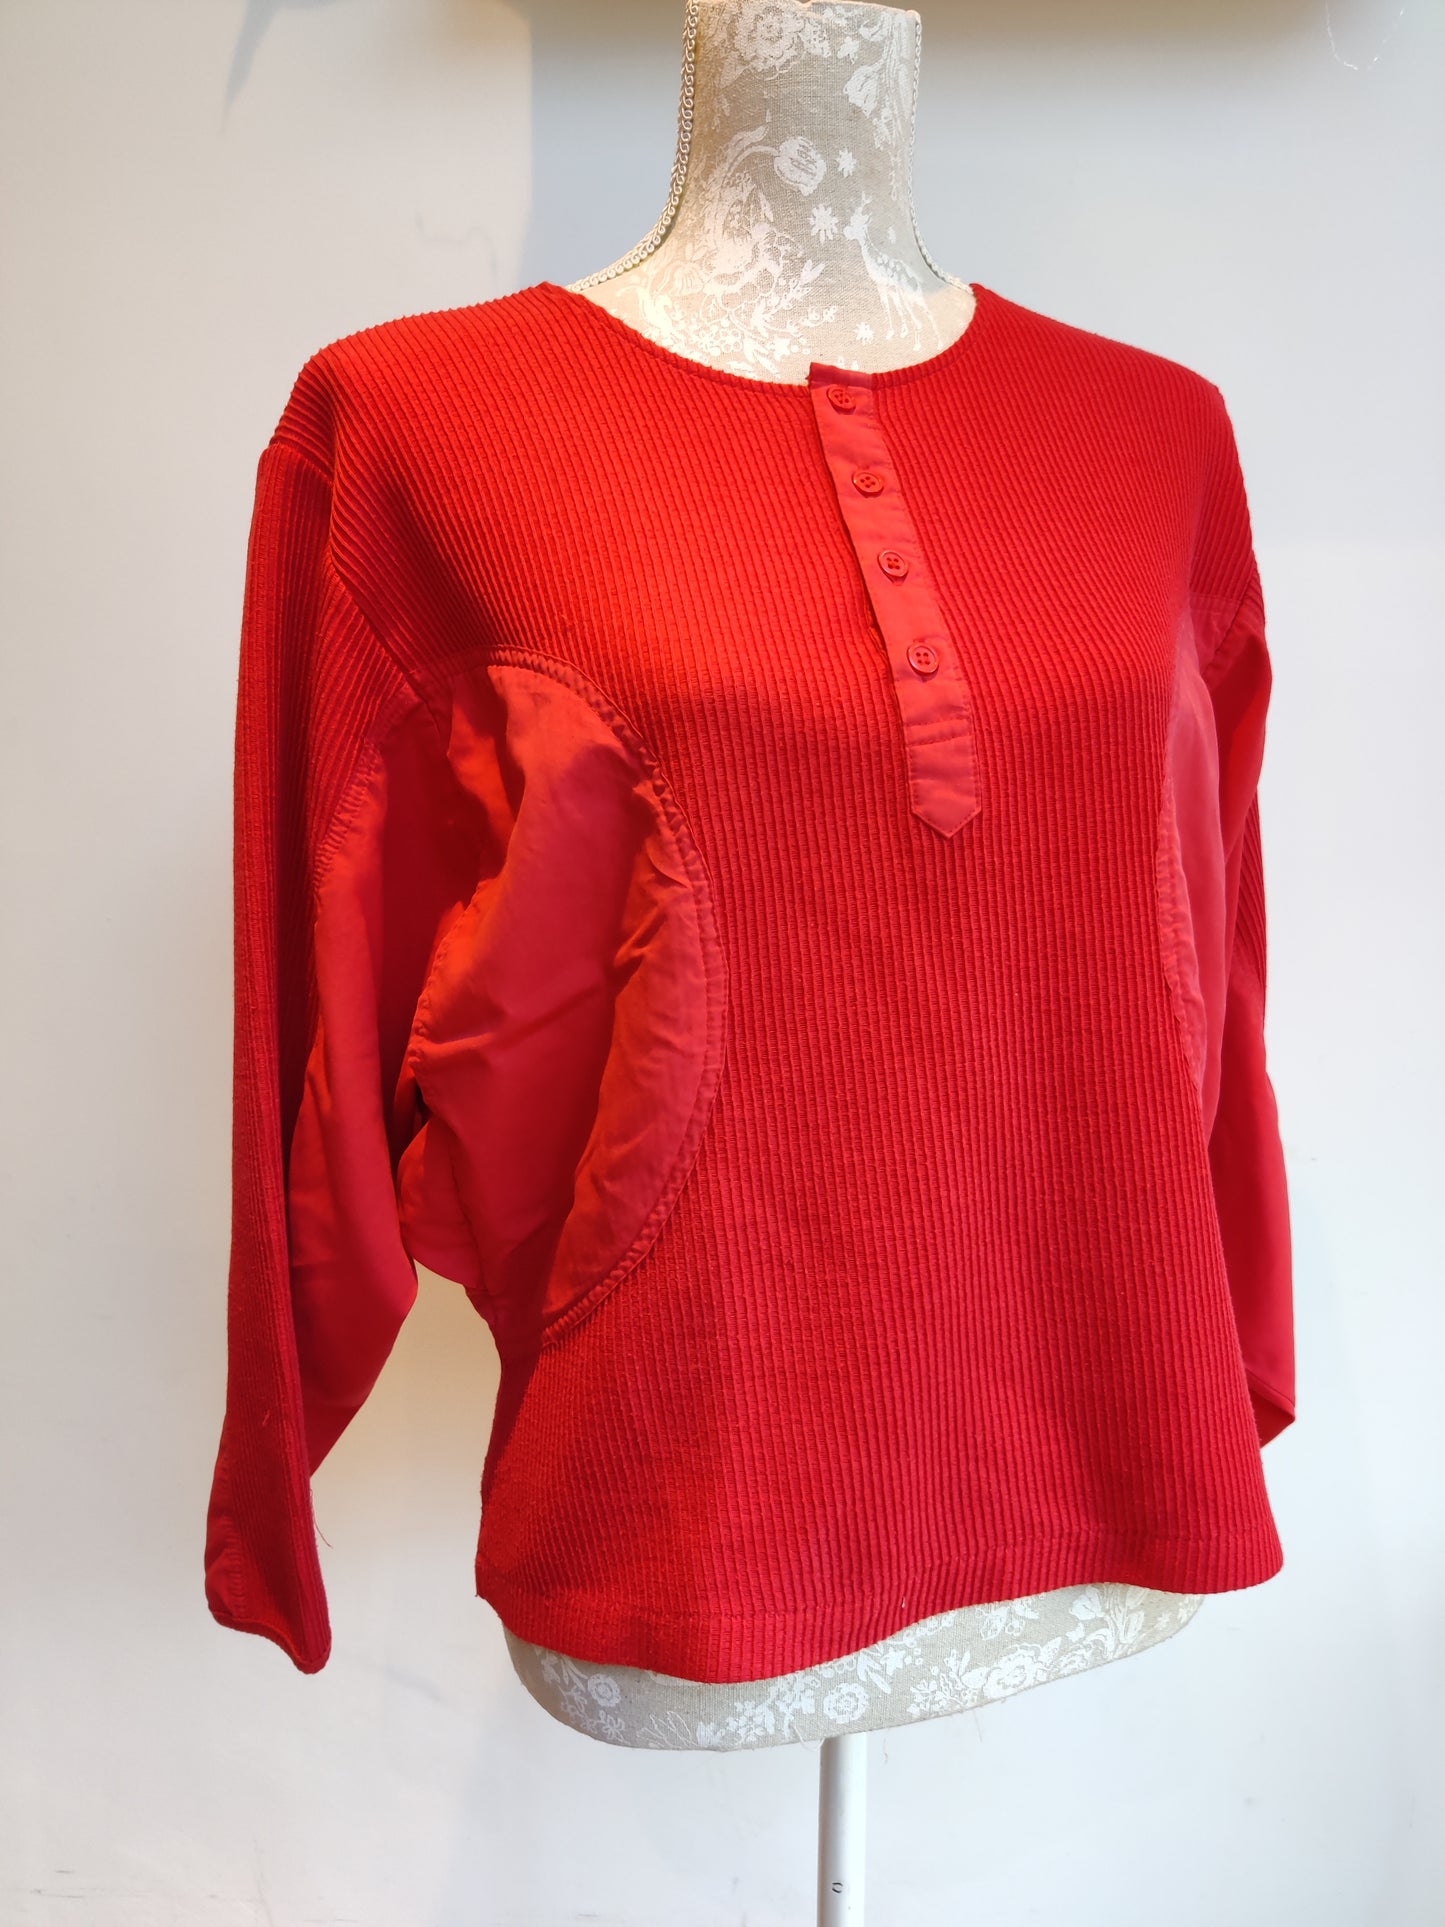 80s batwing top in red